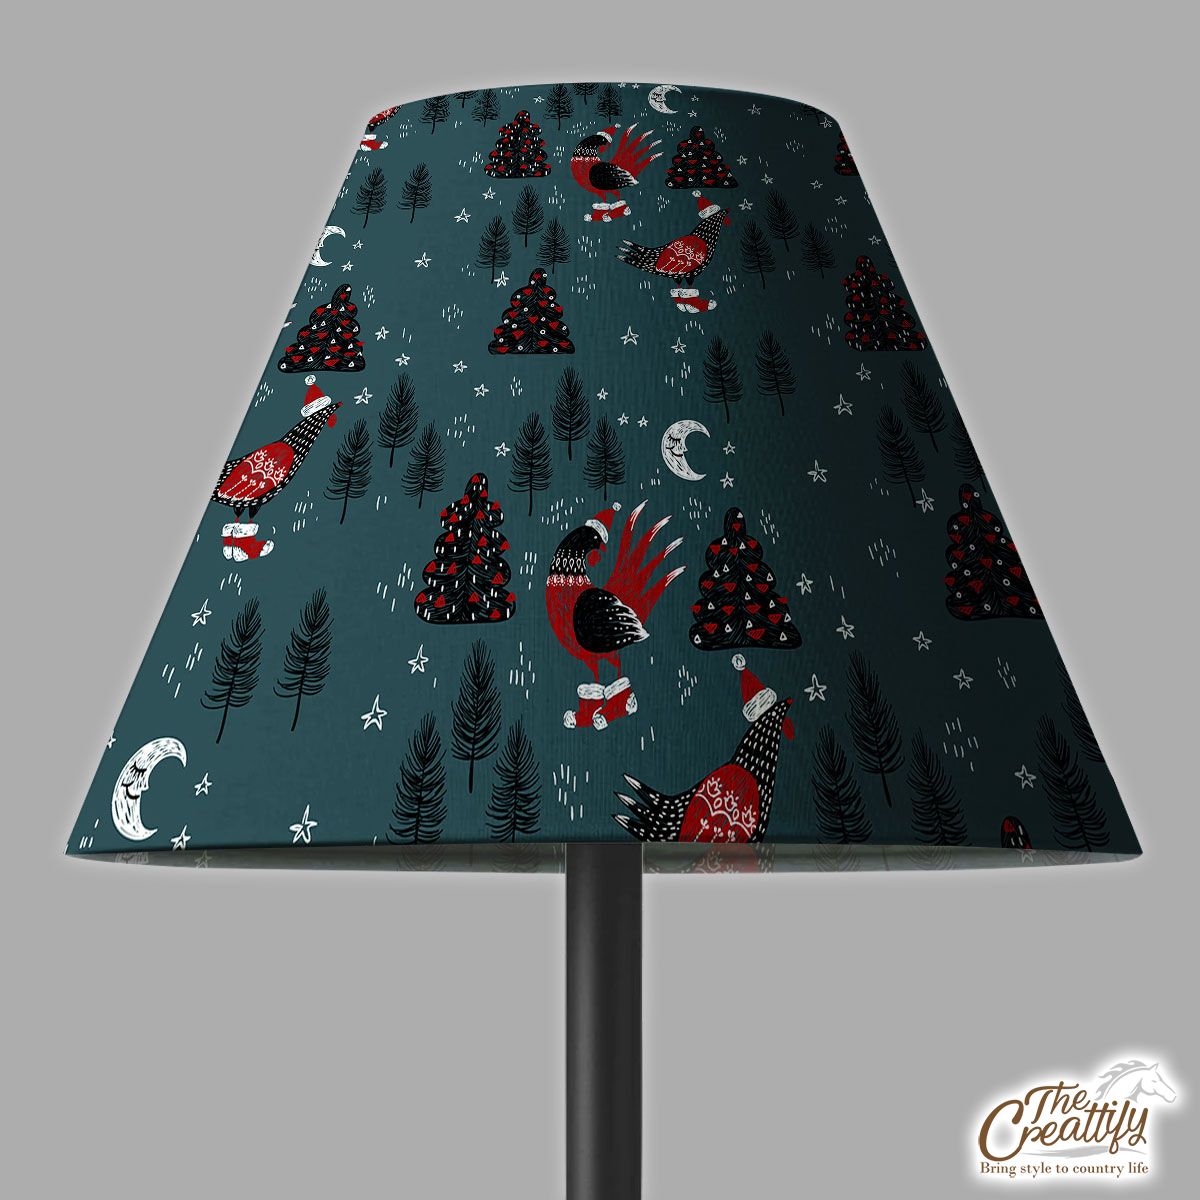 Christmas Turkey With Santa Hat, Sweater And Red Socks On The Pine Tree Background Lamp Cover